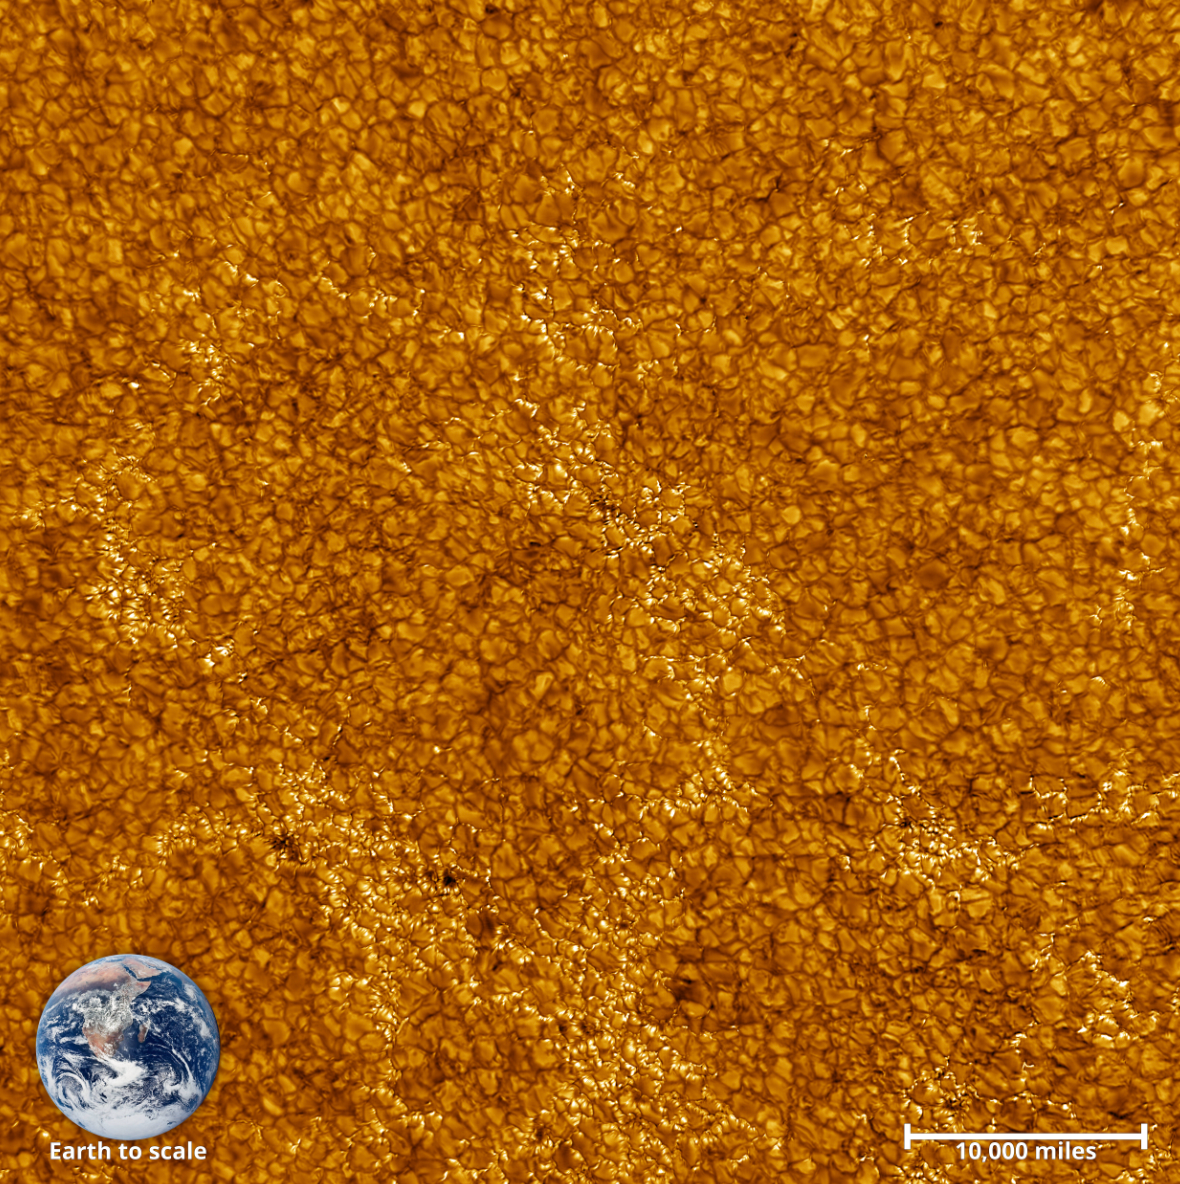 The sun’s chromosphere is shades of golden in these new images